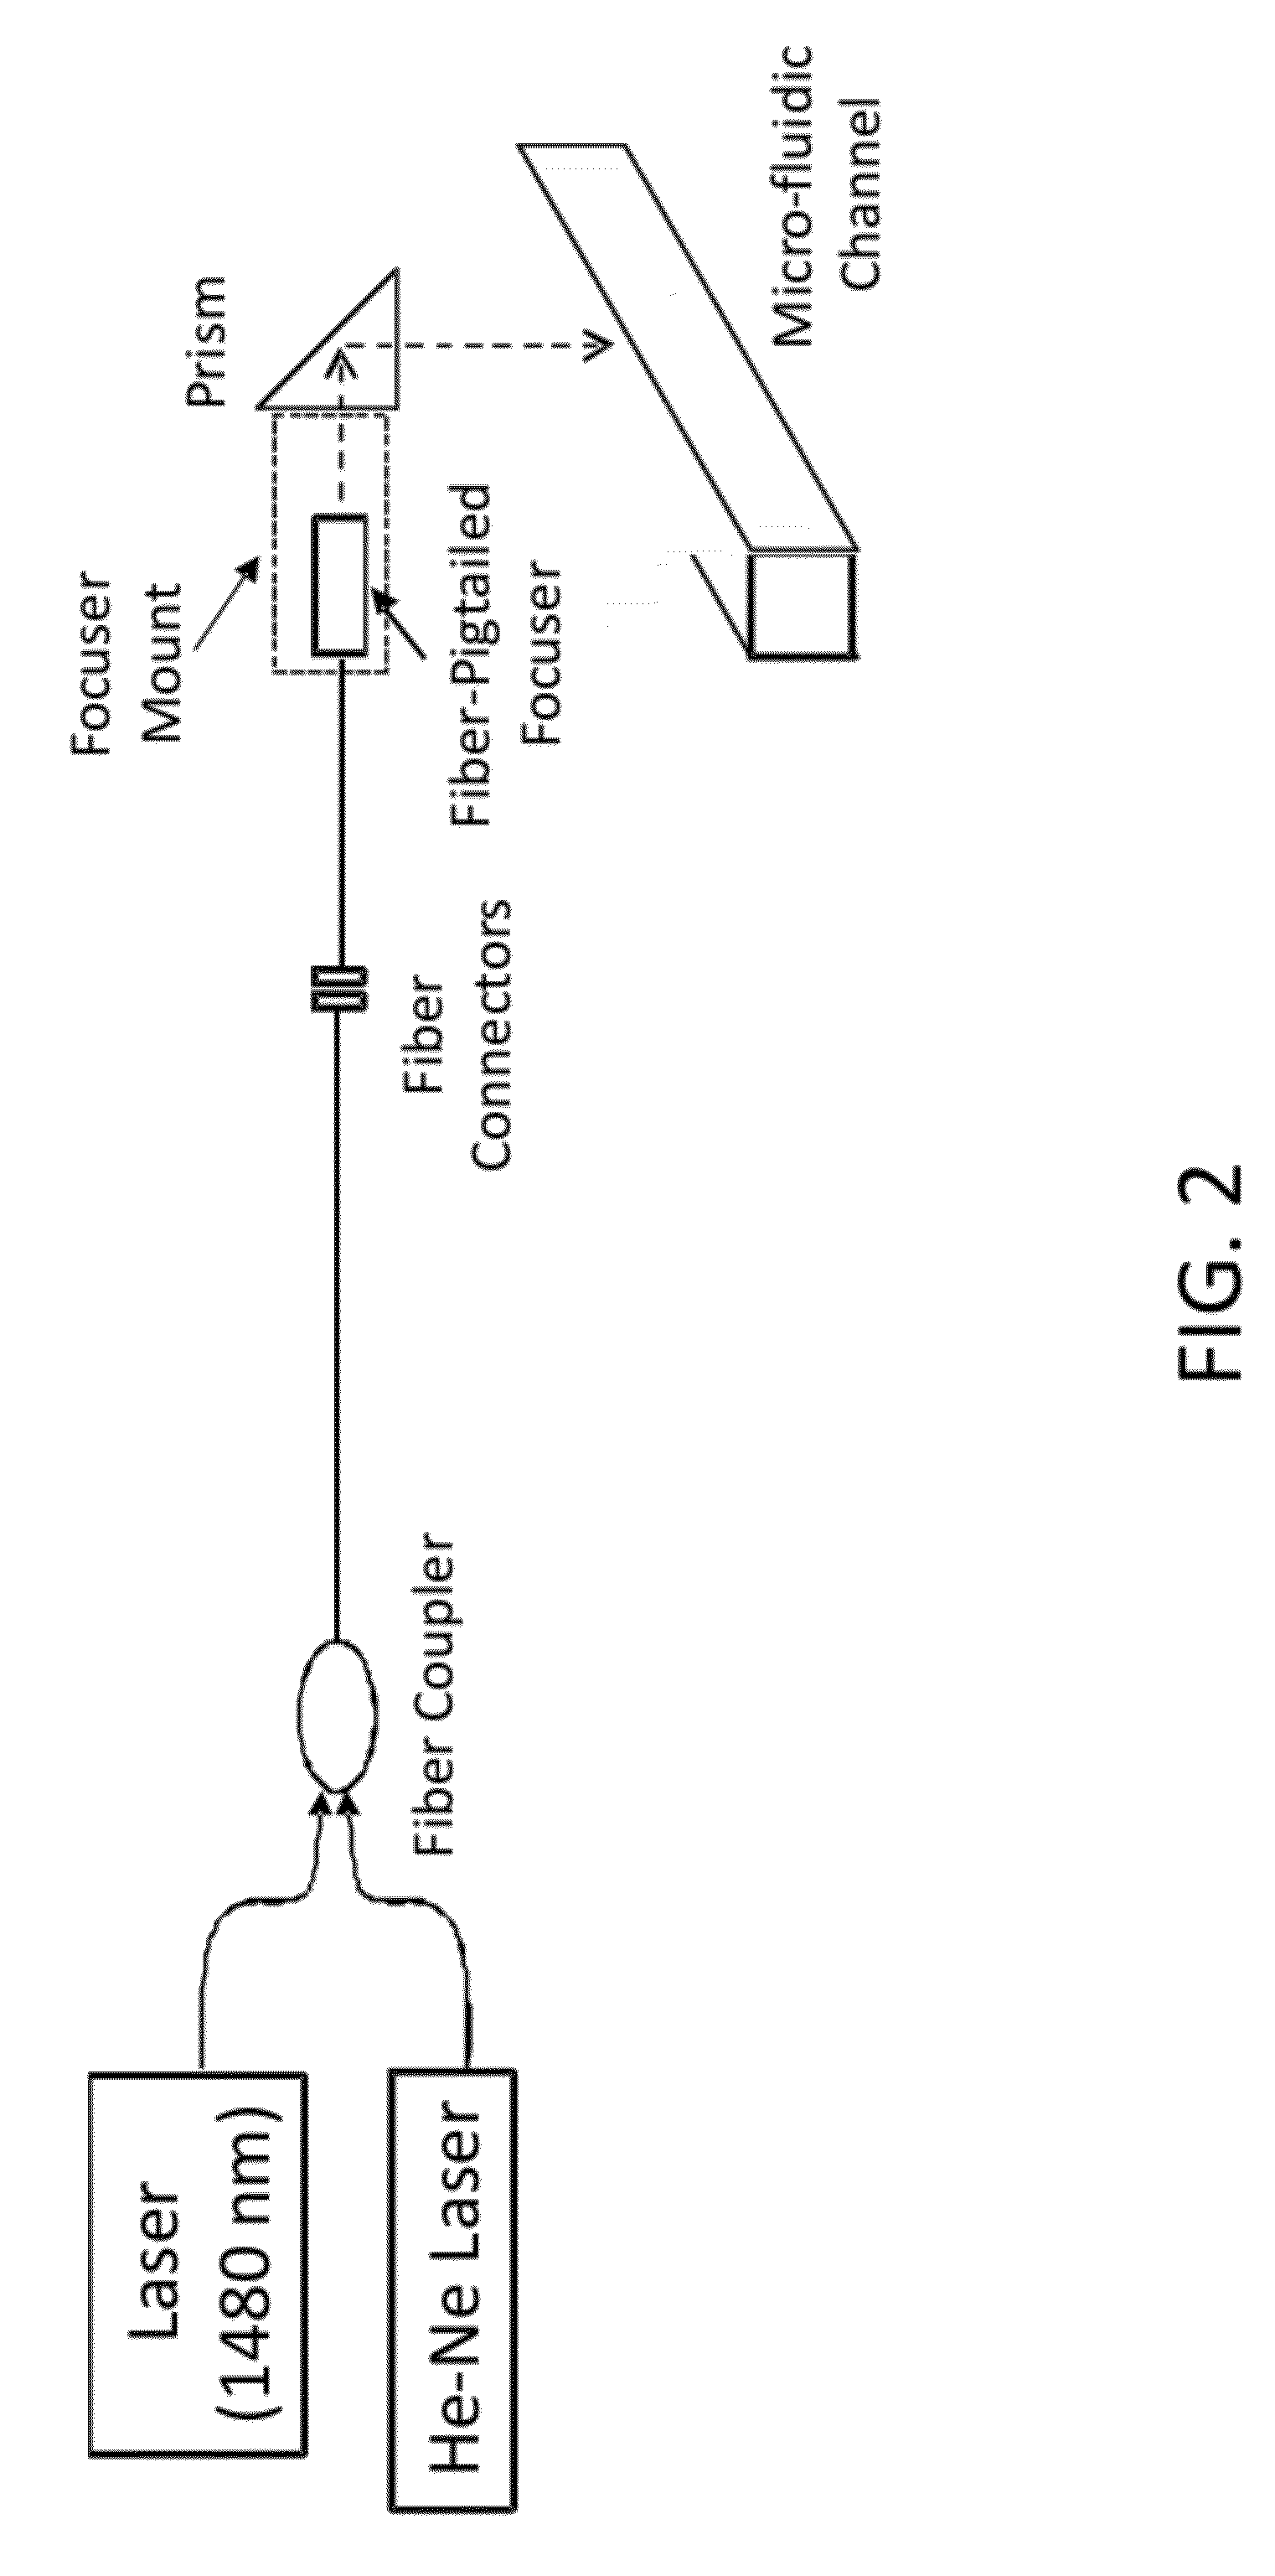 Method of Changing Fluid Flow by Using an Optical Beam